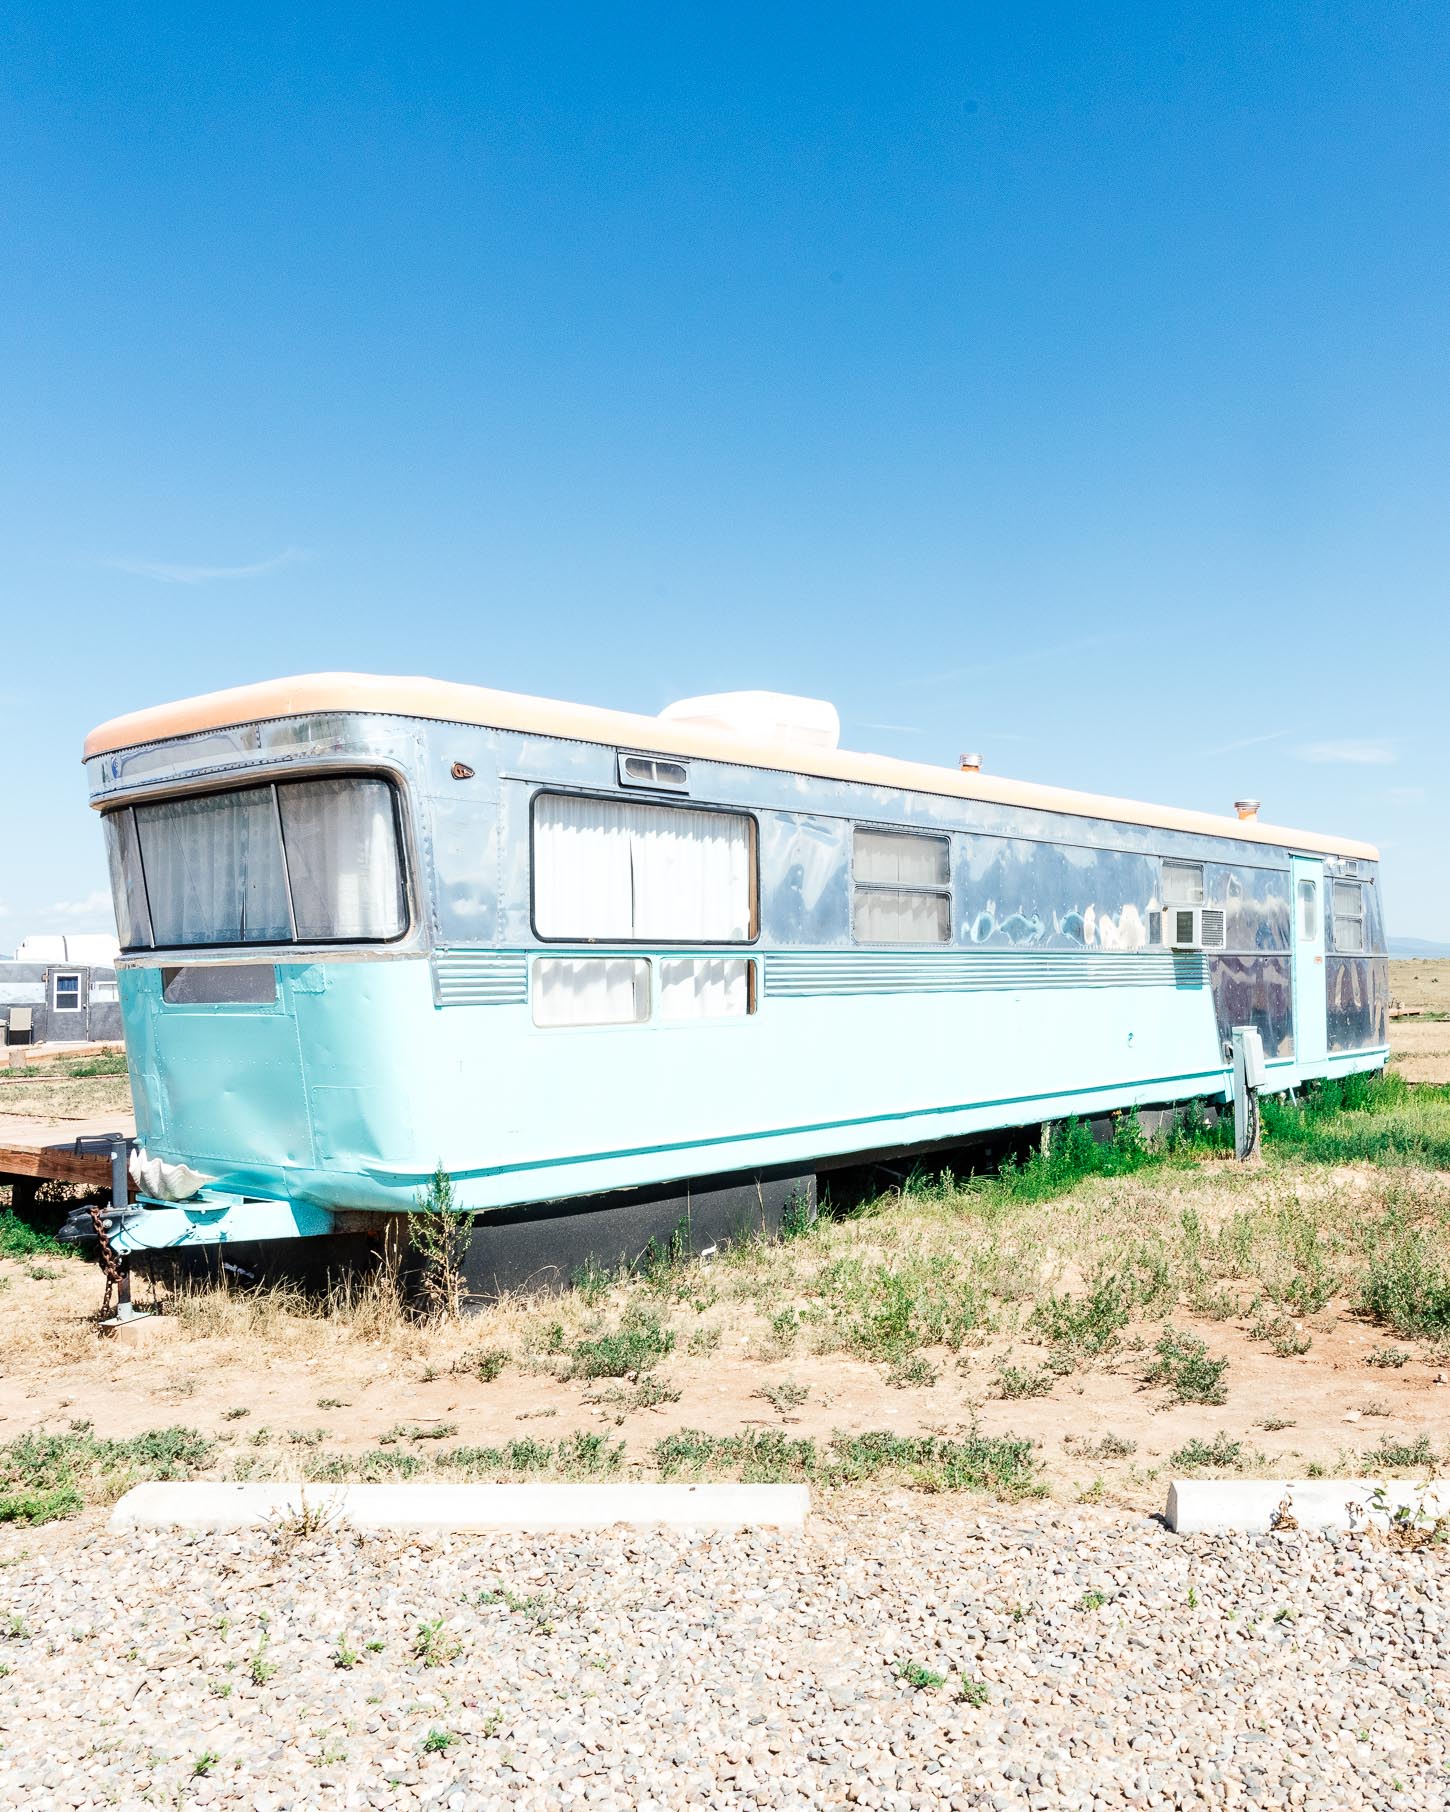 glamping vintage trailer camping in new mexico #travel #glamping #vintage #trailer